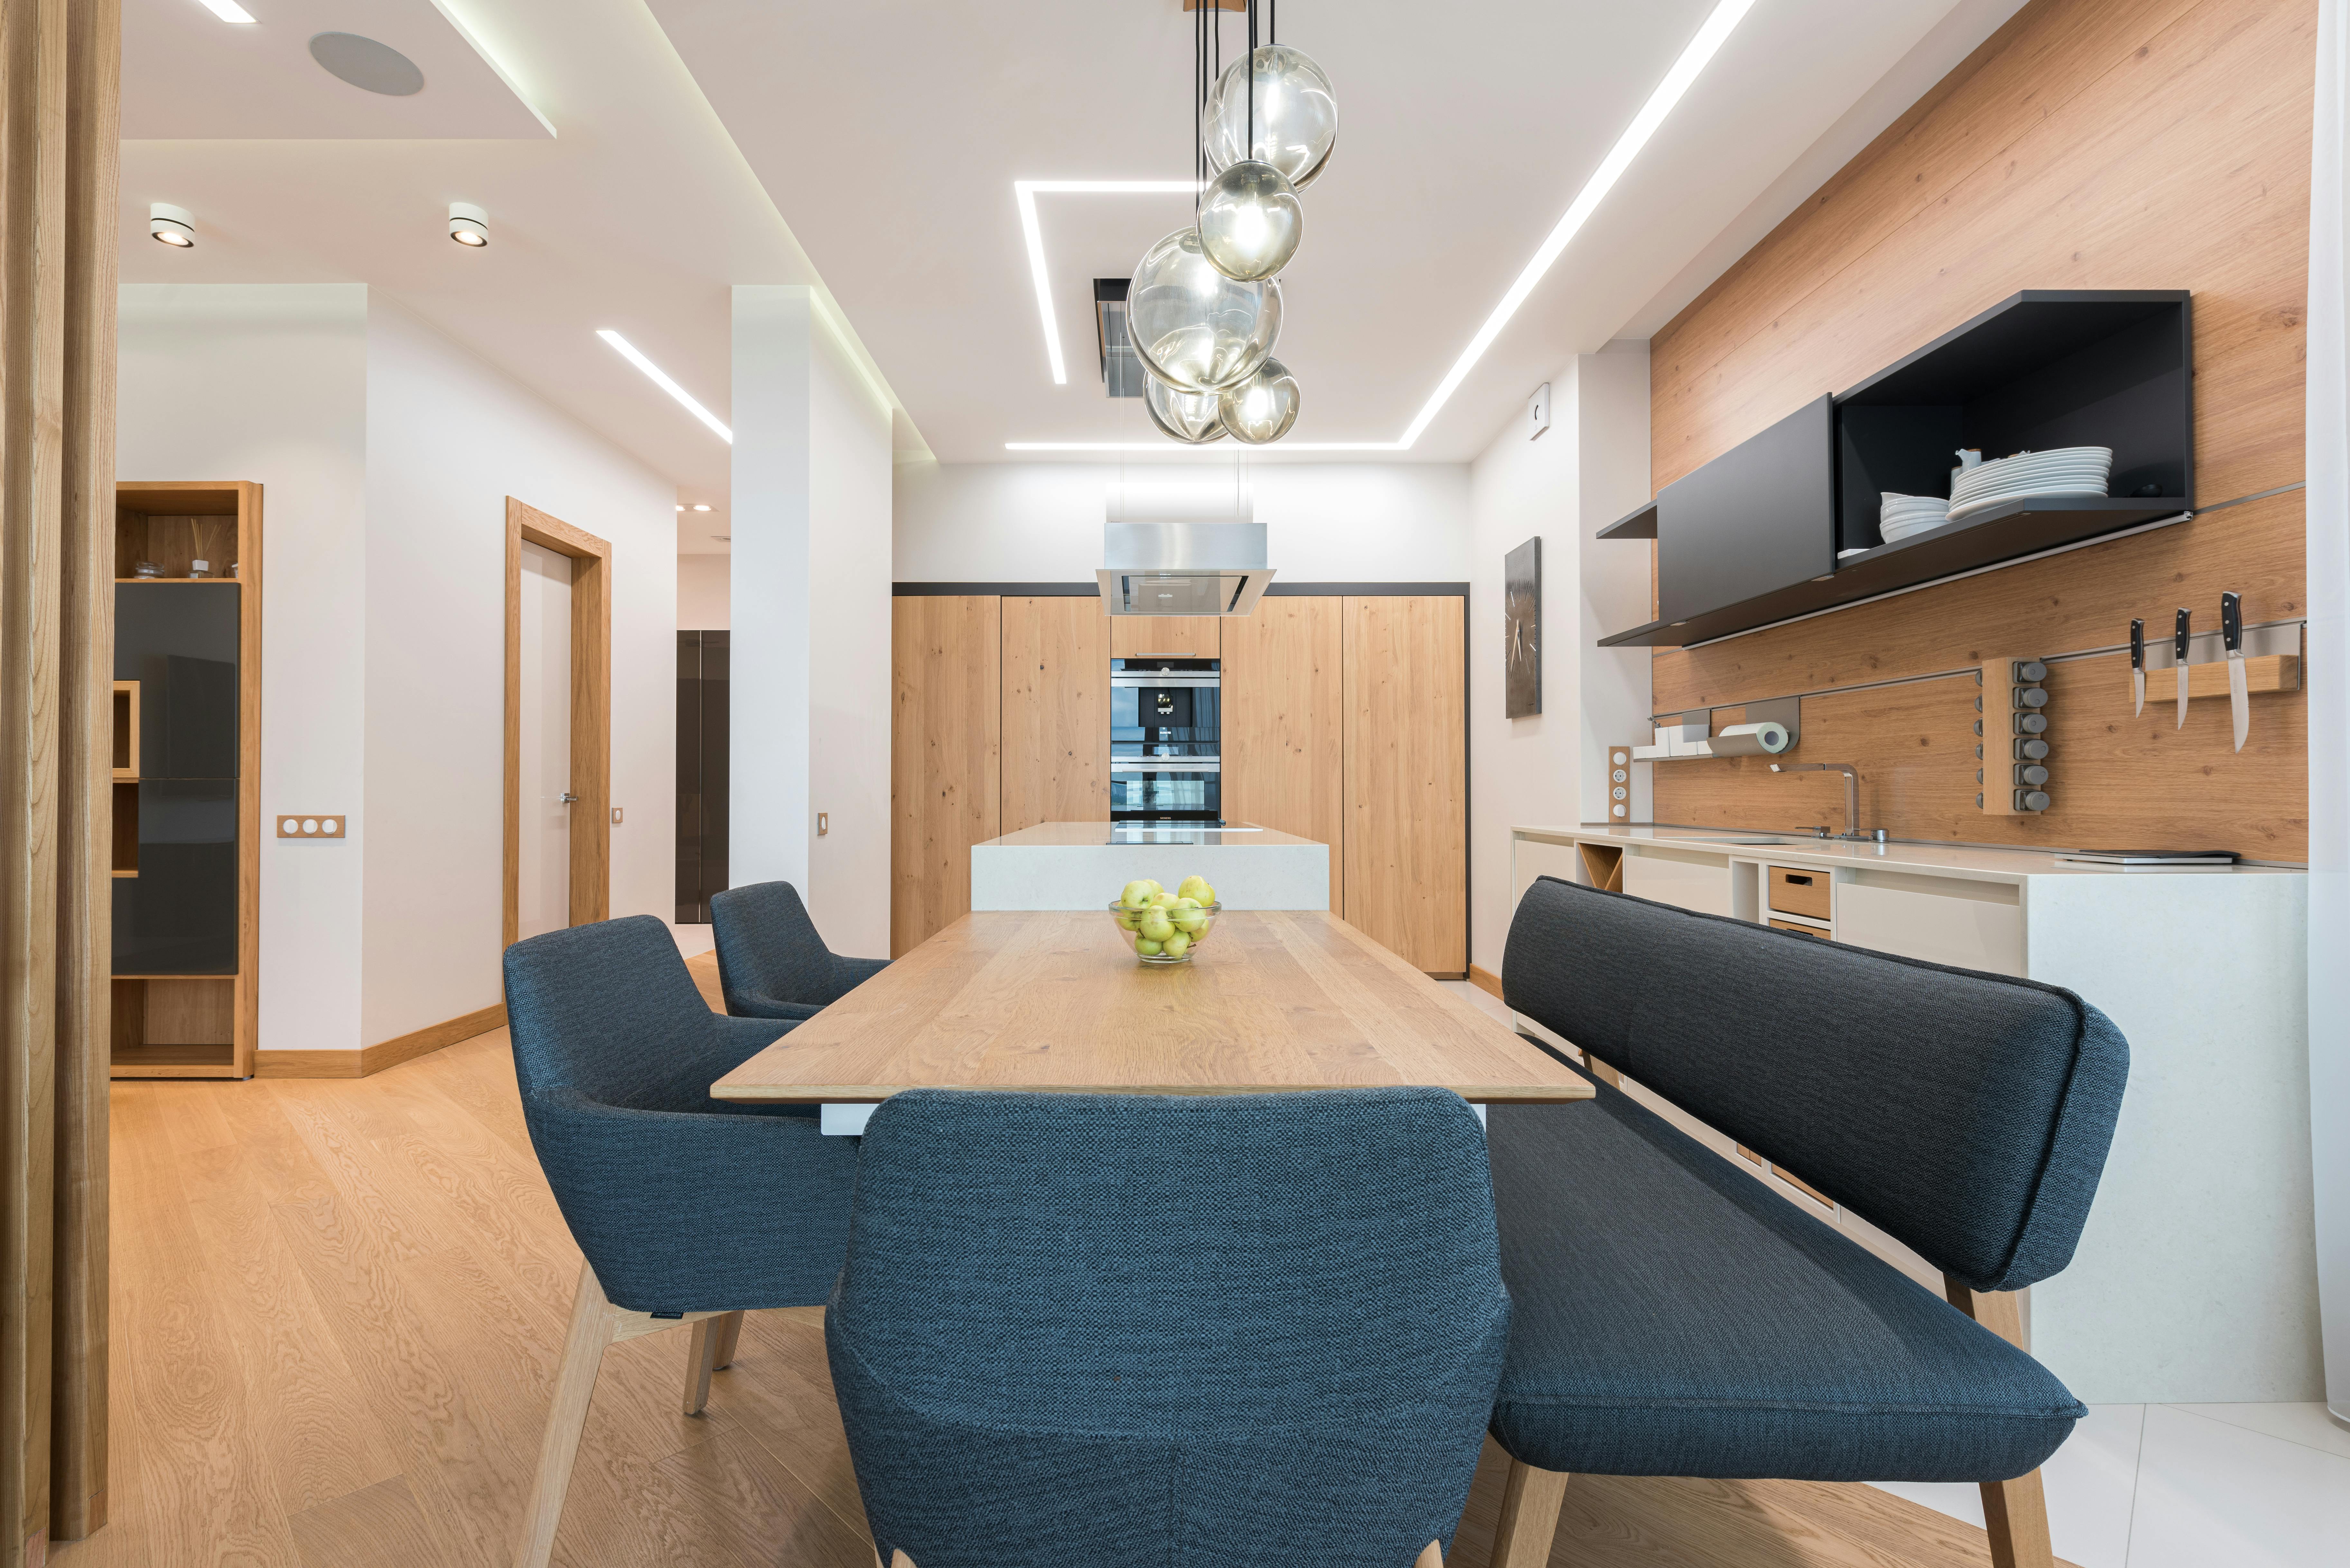 interior of modern kitchen with dining zone and wooden furniture